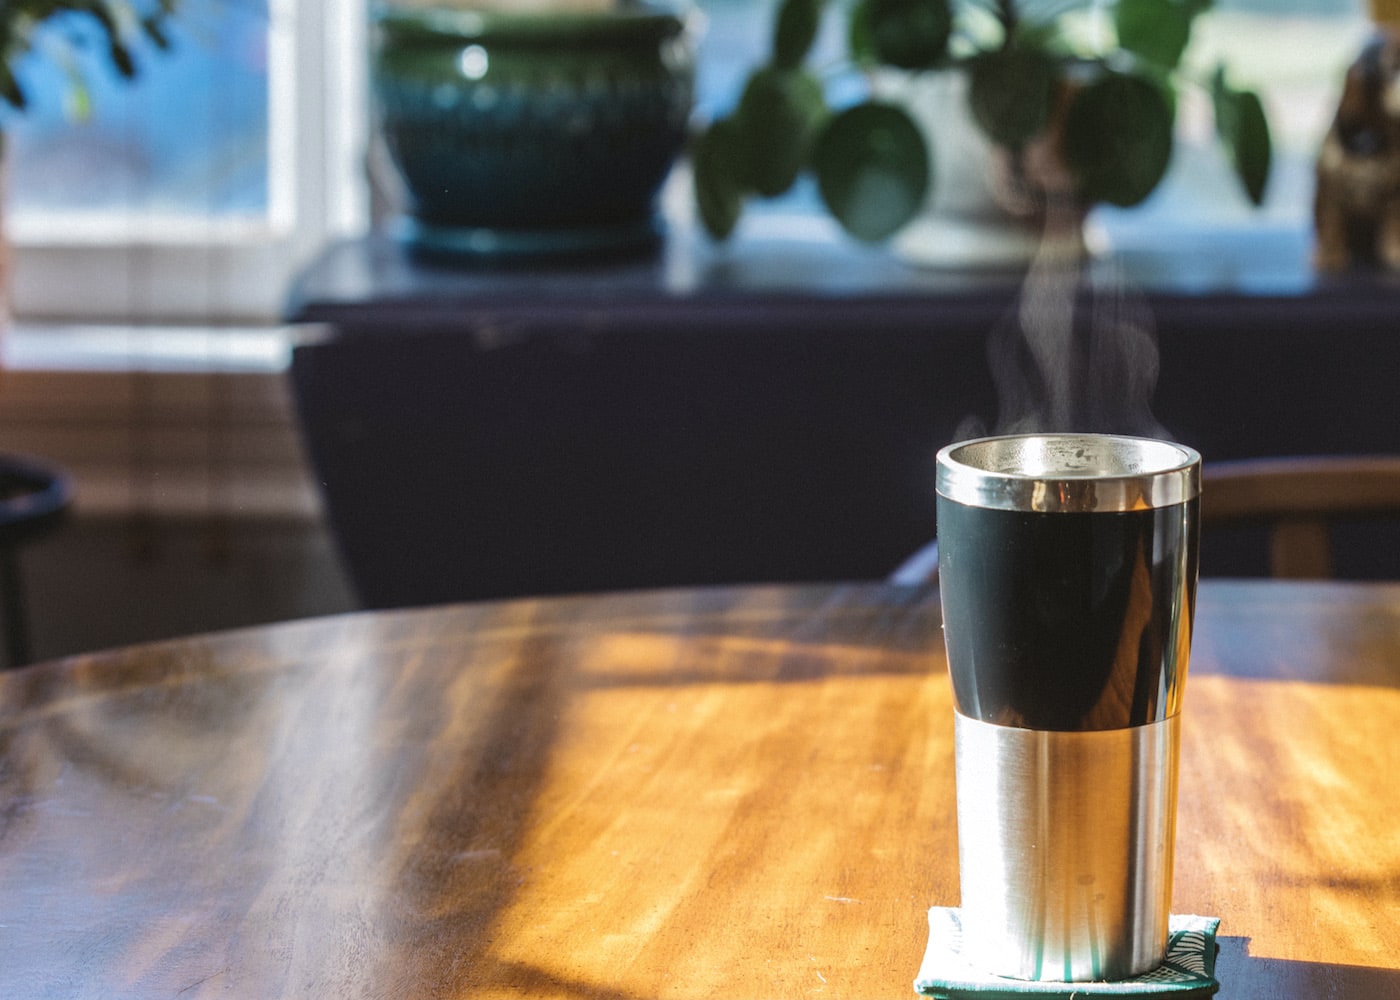 Hot coffee in a stainless steel tumbler